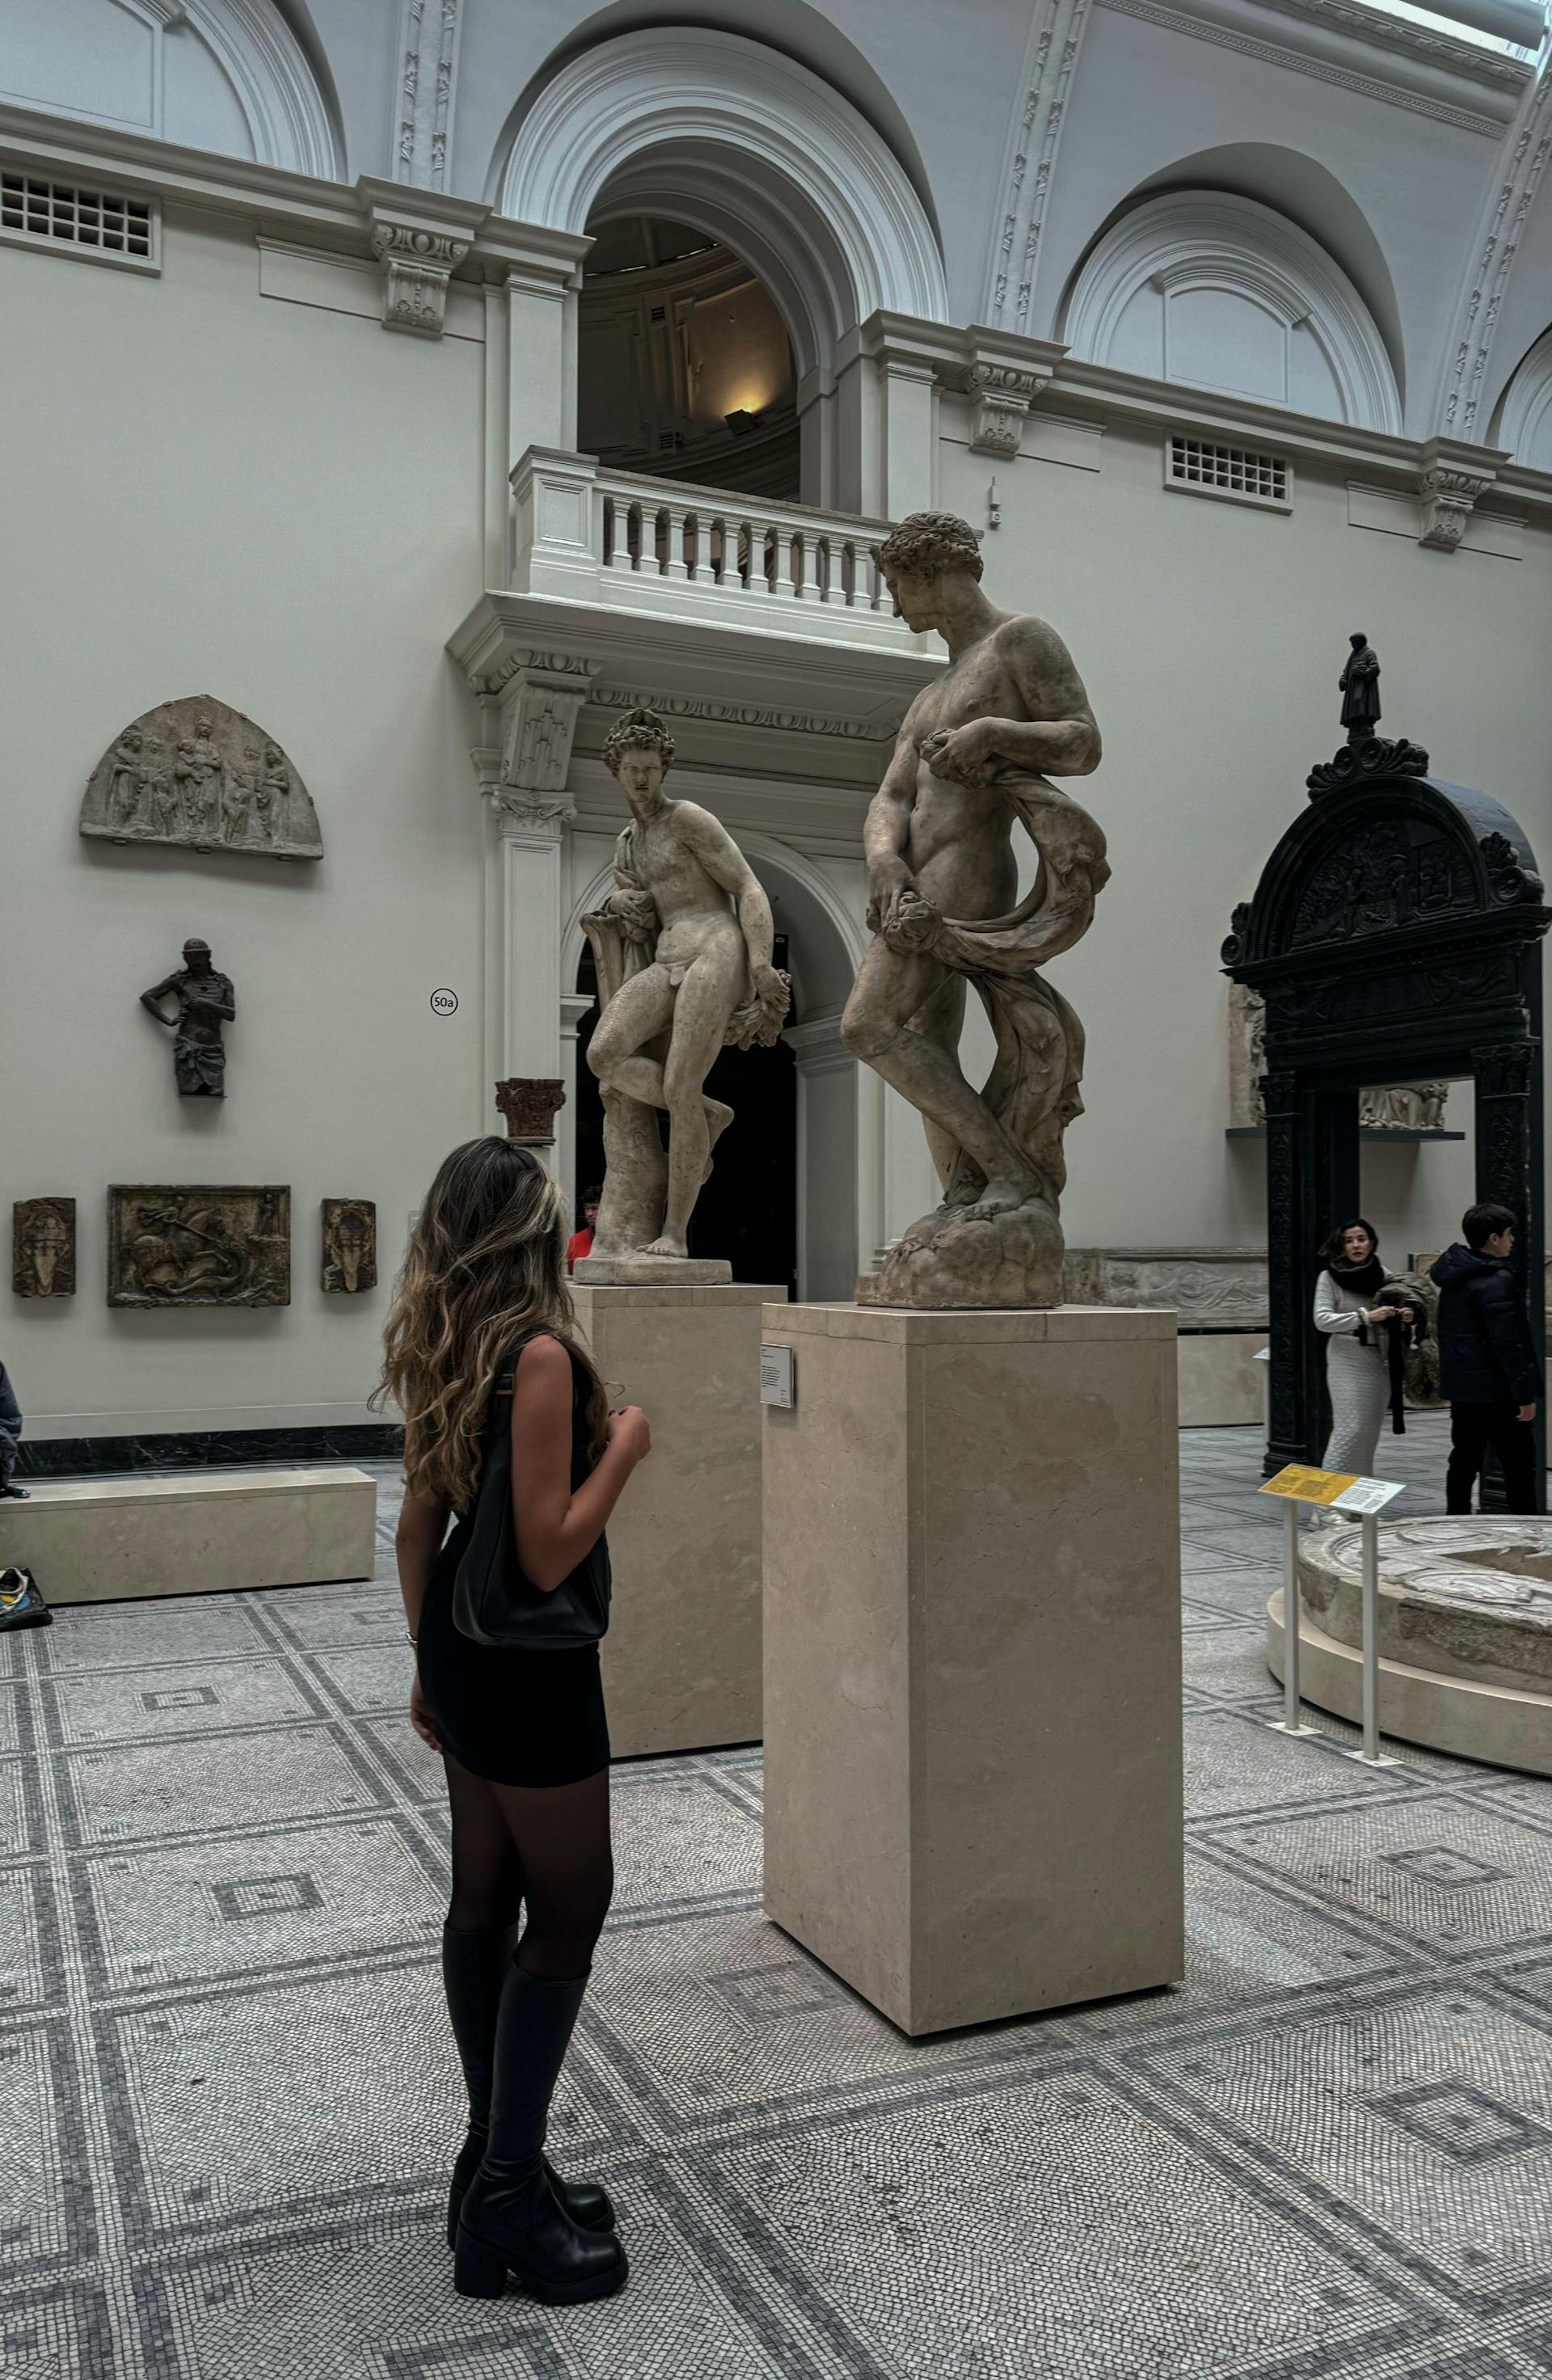 A woman in a museum | Source: Pexels